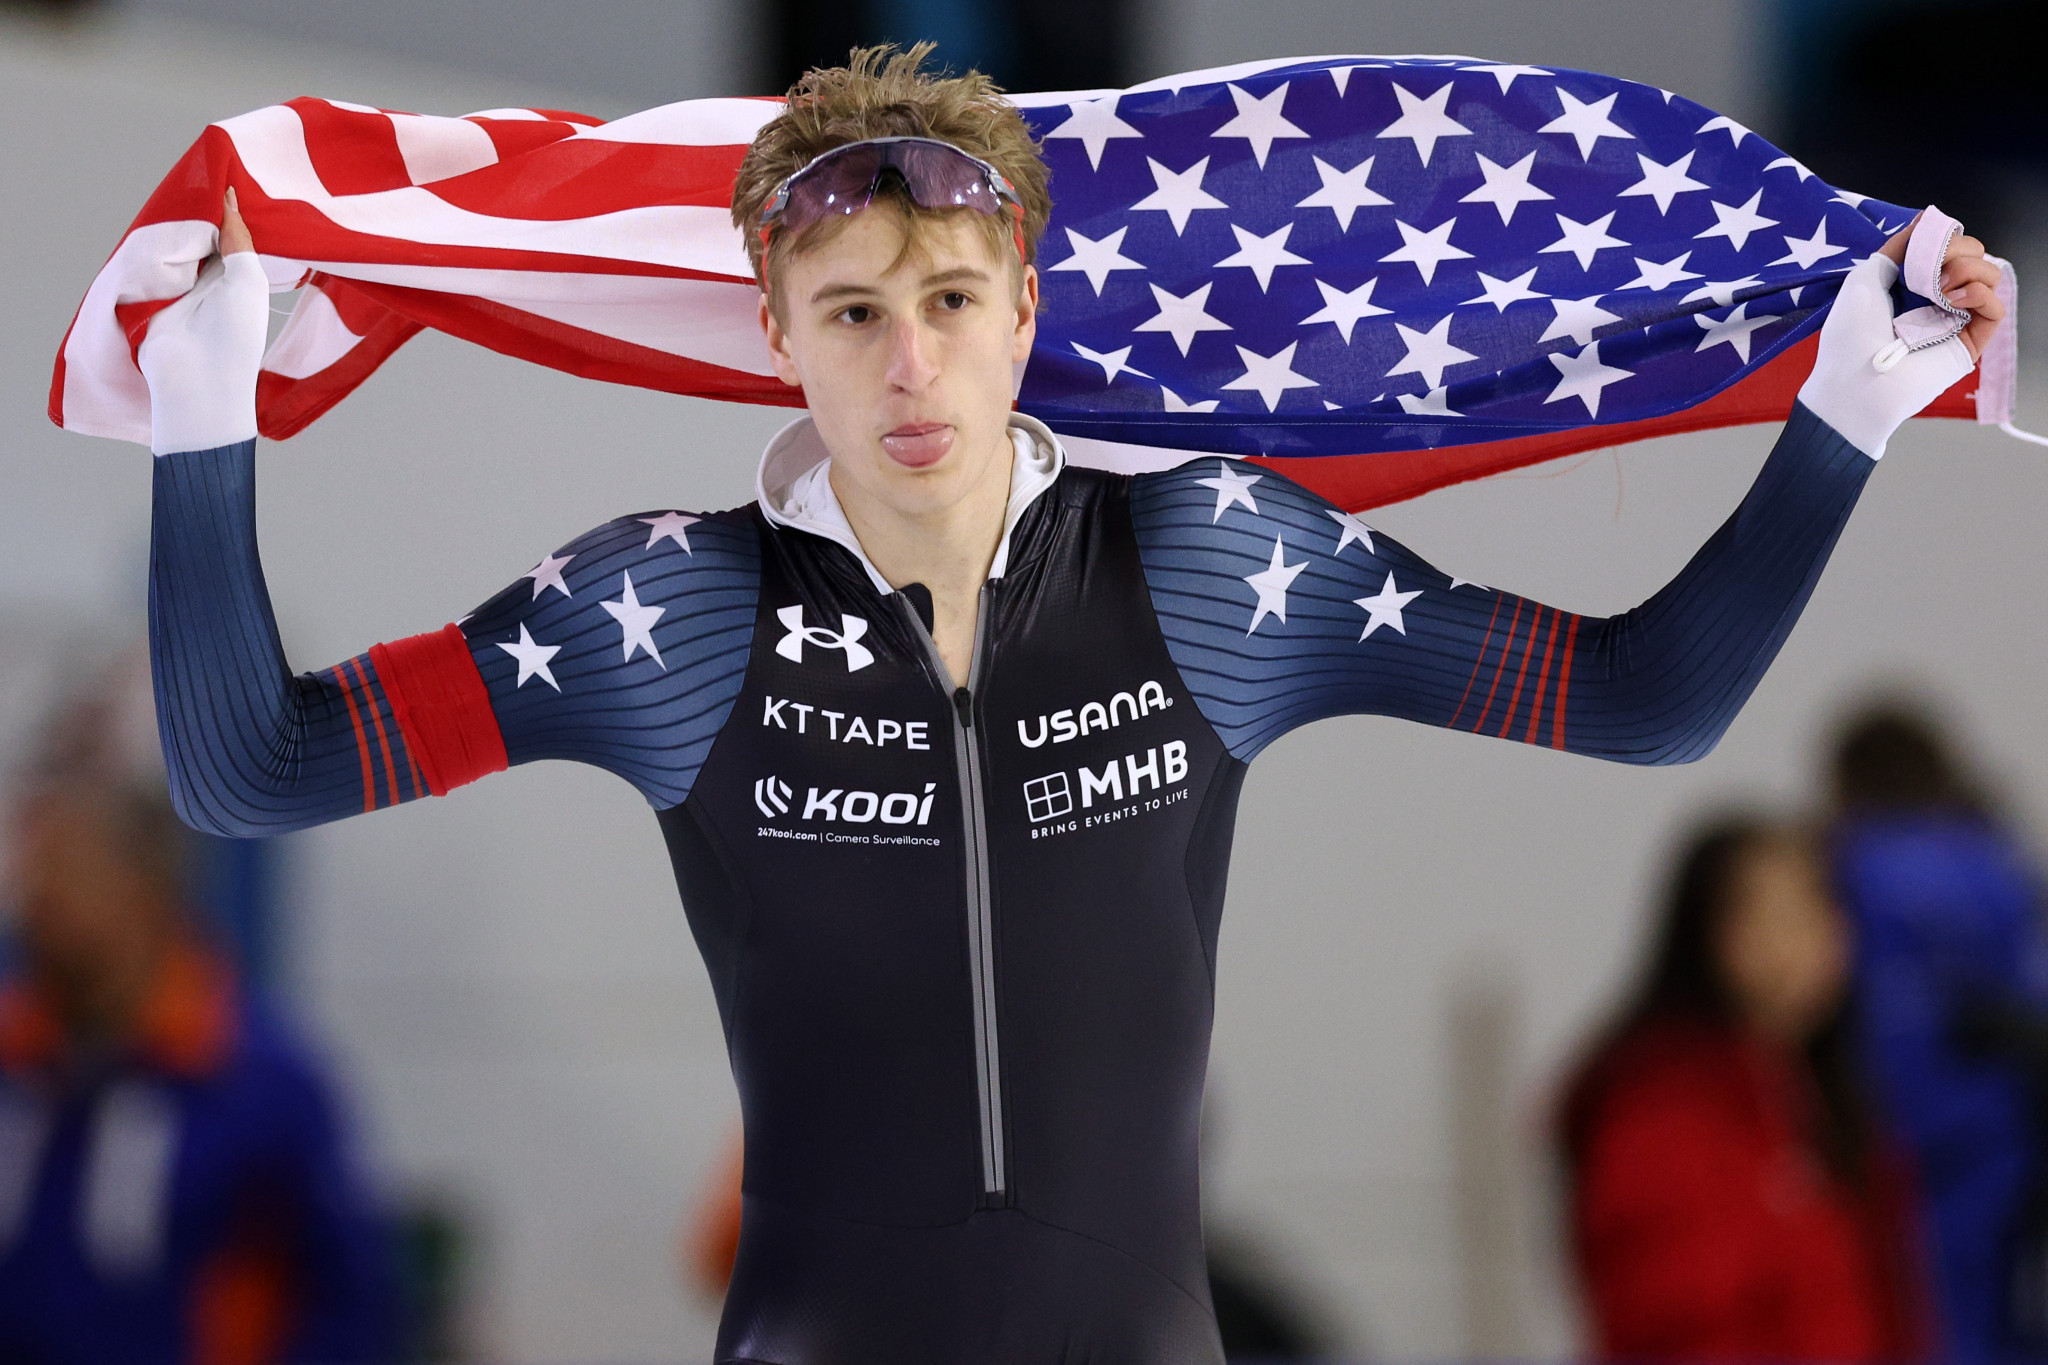 Jordan Stolz of the United States added to his junior world title by winning the men's 500m gold at the ISU World Single Distance Championships in Heerenveen ©Getty Images